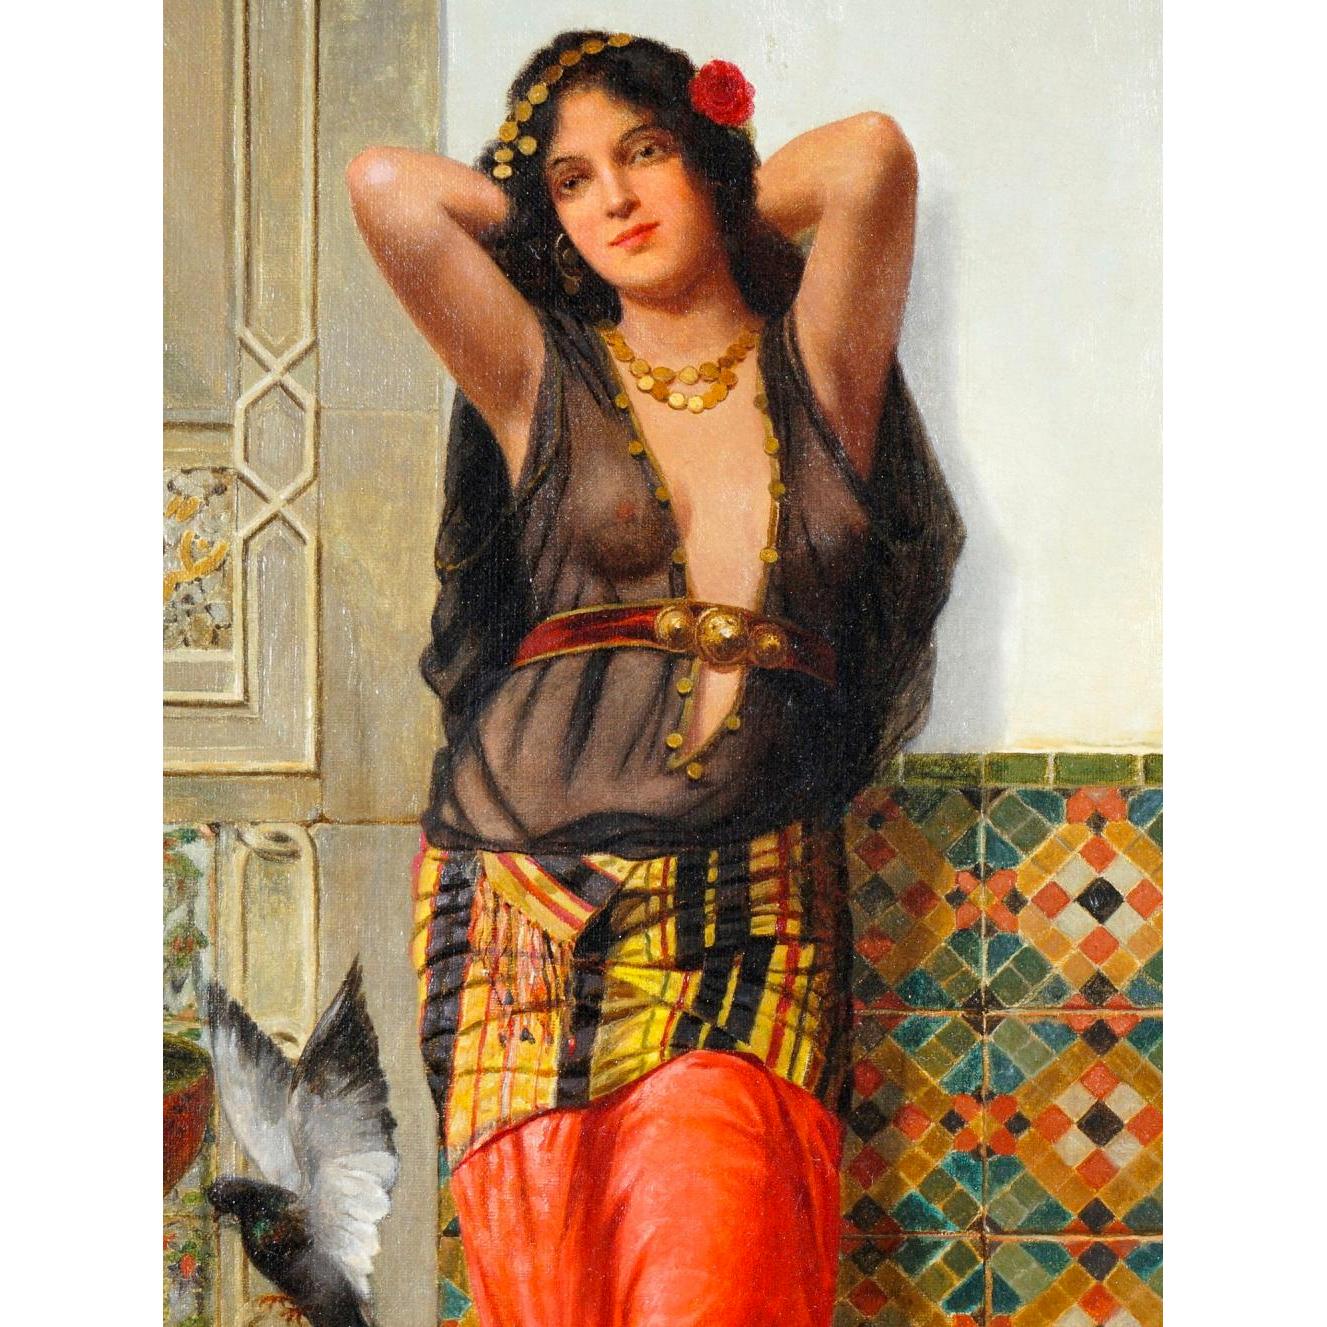 A fine oil painting depicting a figure of a harem woman wearing a sheer top in courtyard with pigeons and fountain. 

Artist: Vincent G. Stiepevich (1841-1910) 
Origin: Russian
Date: 19th century
Signature: Signed L/R
Medium: Oil on